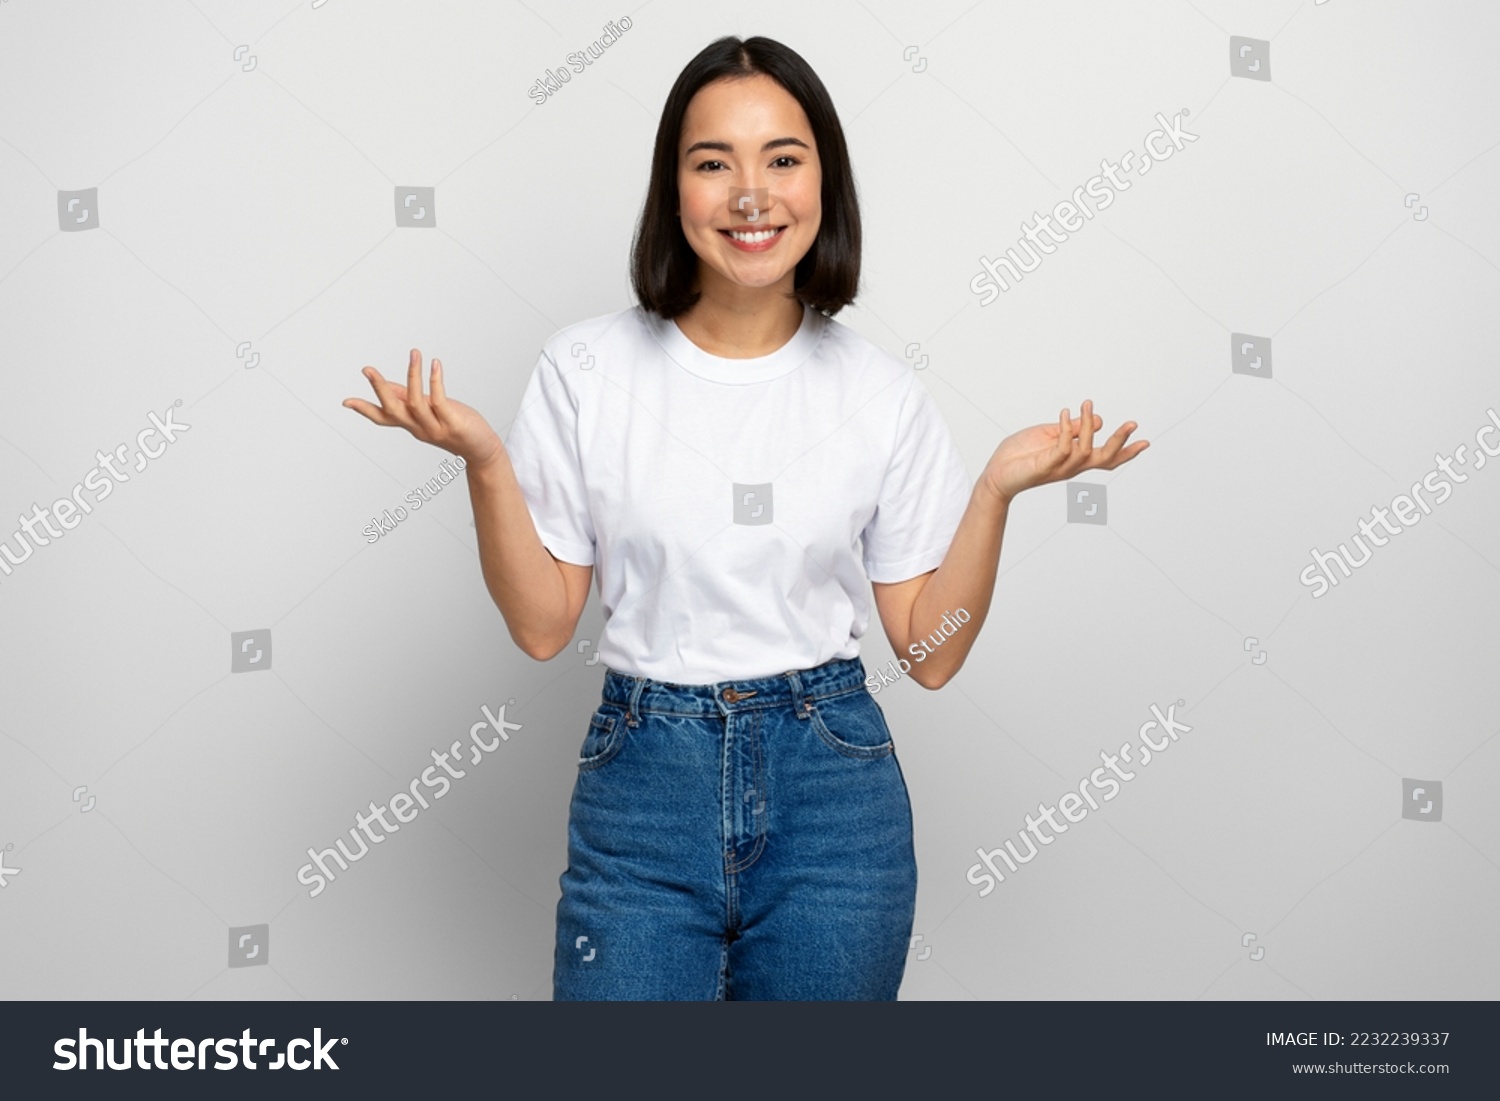 Uncertain positive woman with raised arms, dont know what to do. Indoor studio shot isolated on white background #2232239337